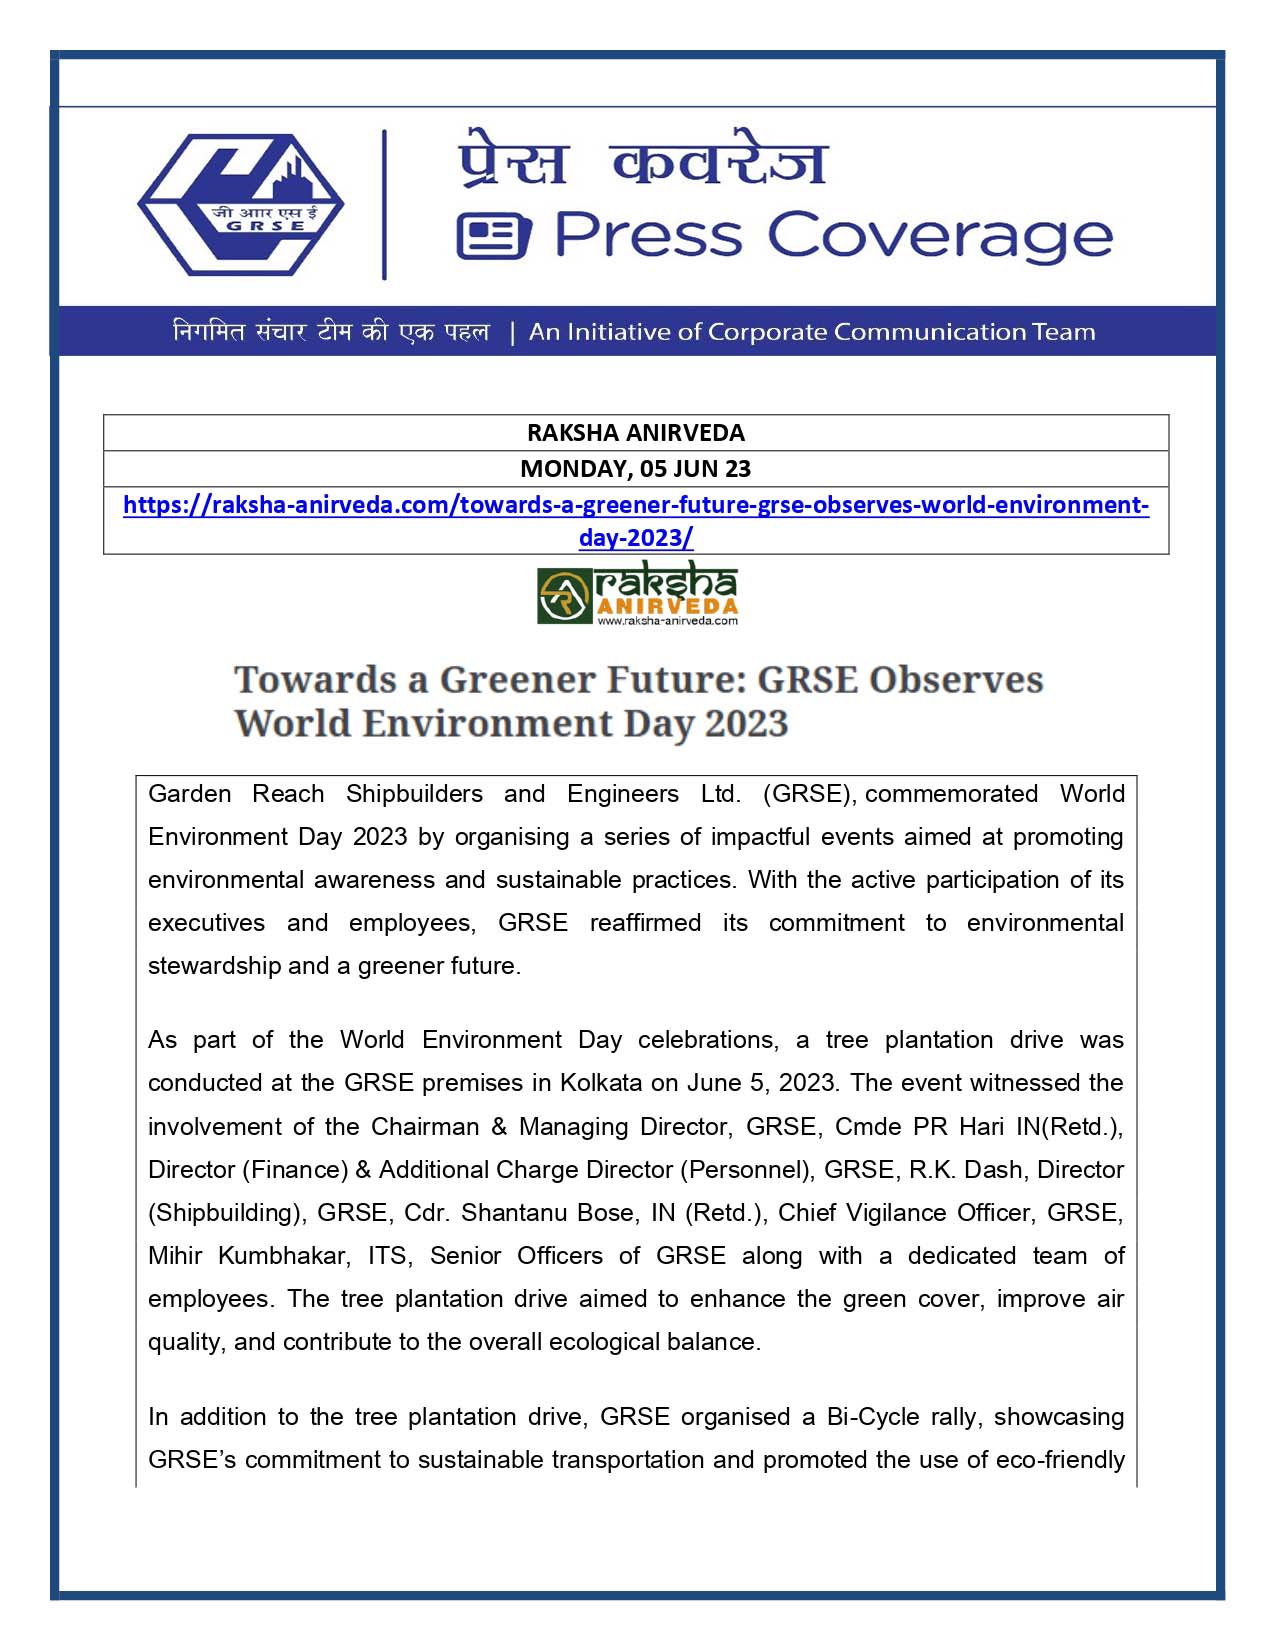 Towards a Greener Future : GRSE observes World Environment Day 2023